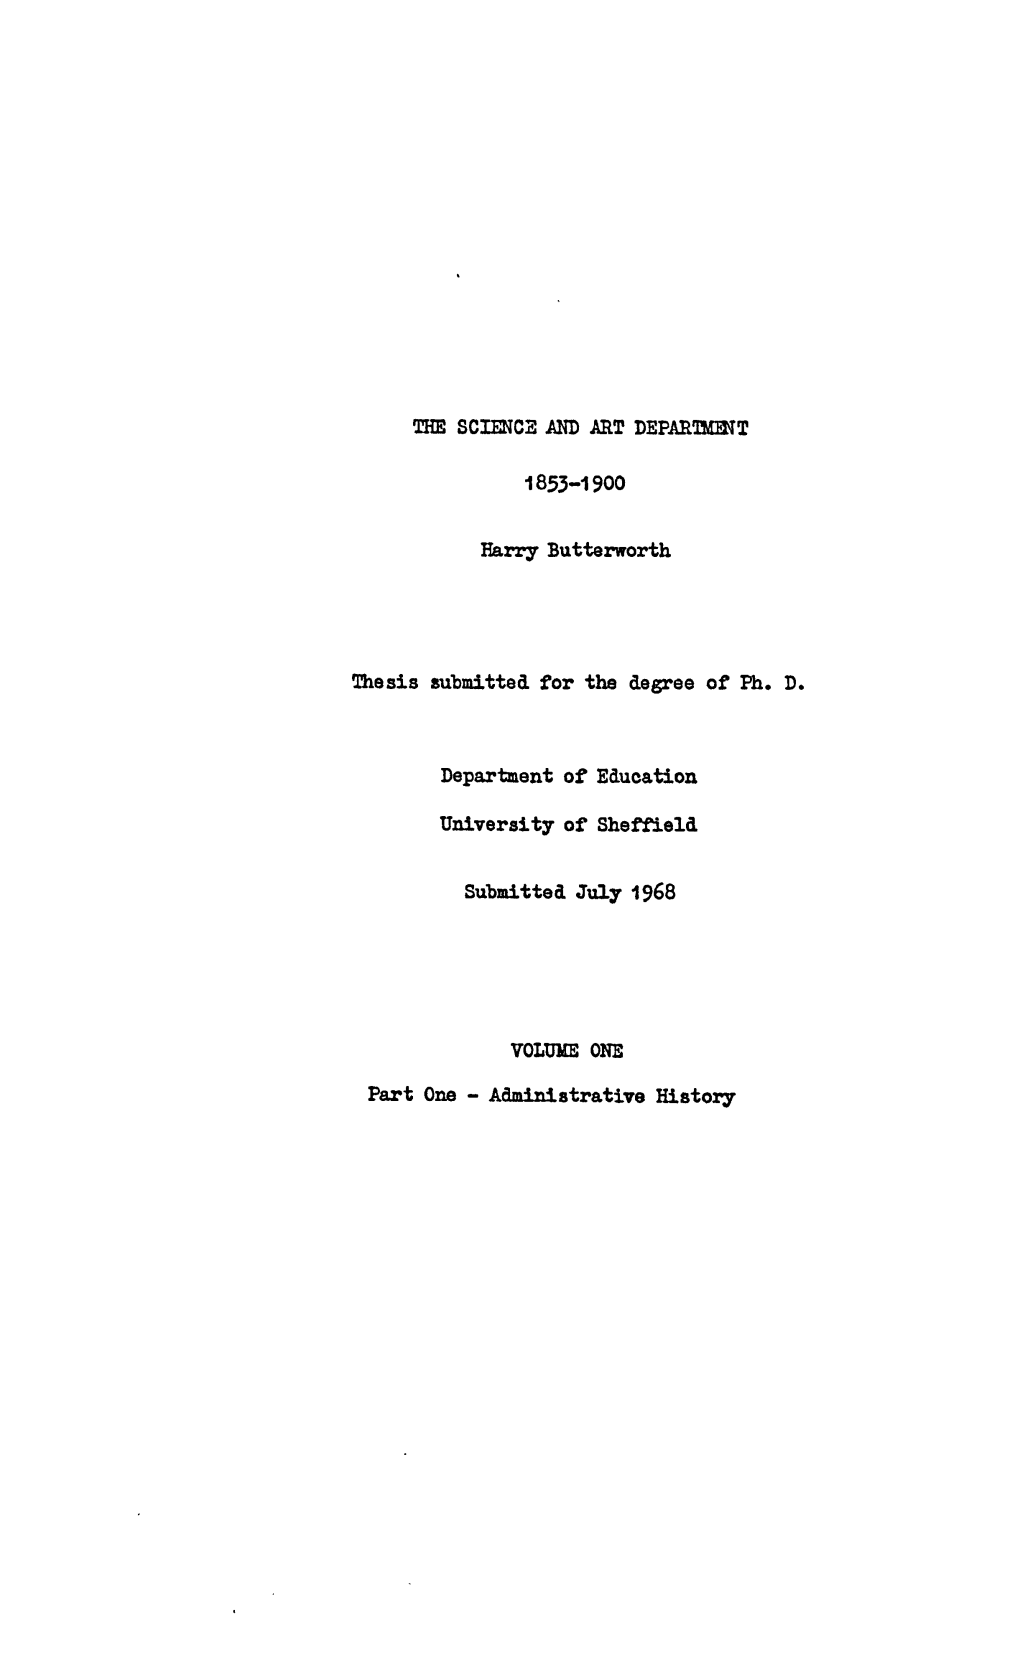 1853-1900 Harry Butterworth Thesis Submitted for the Degree of Ph. D